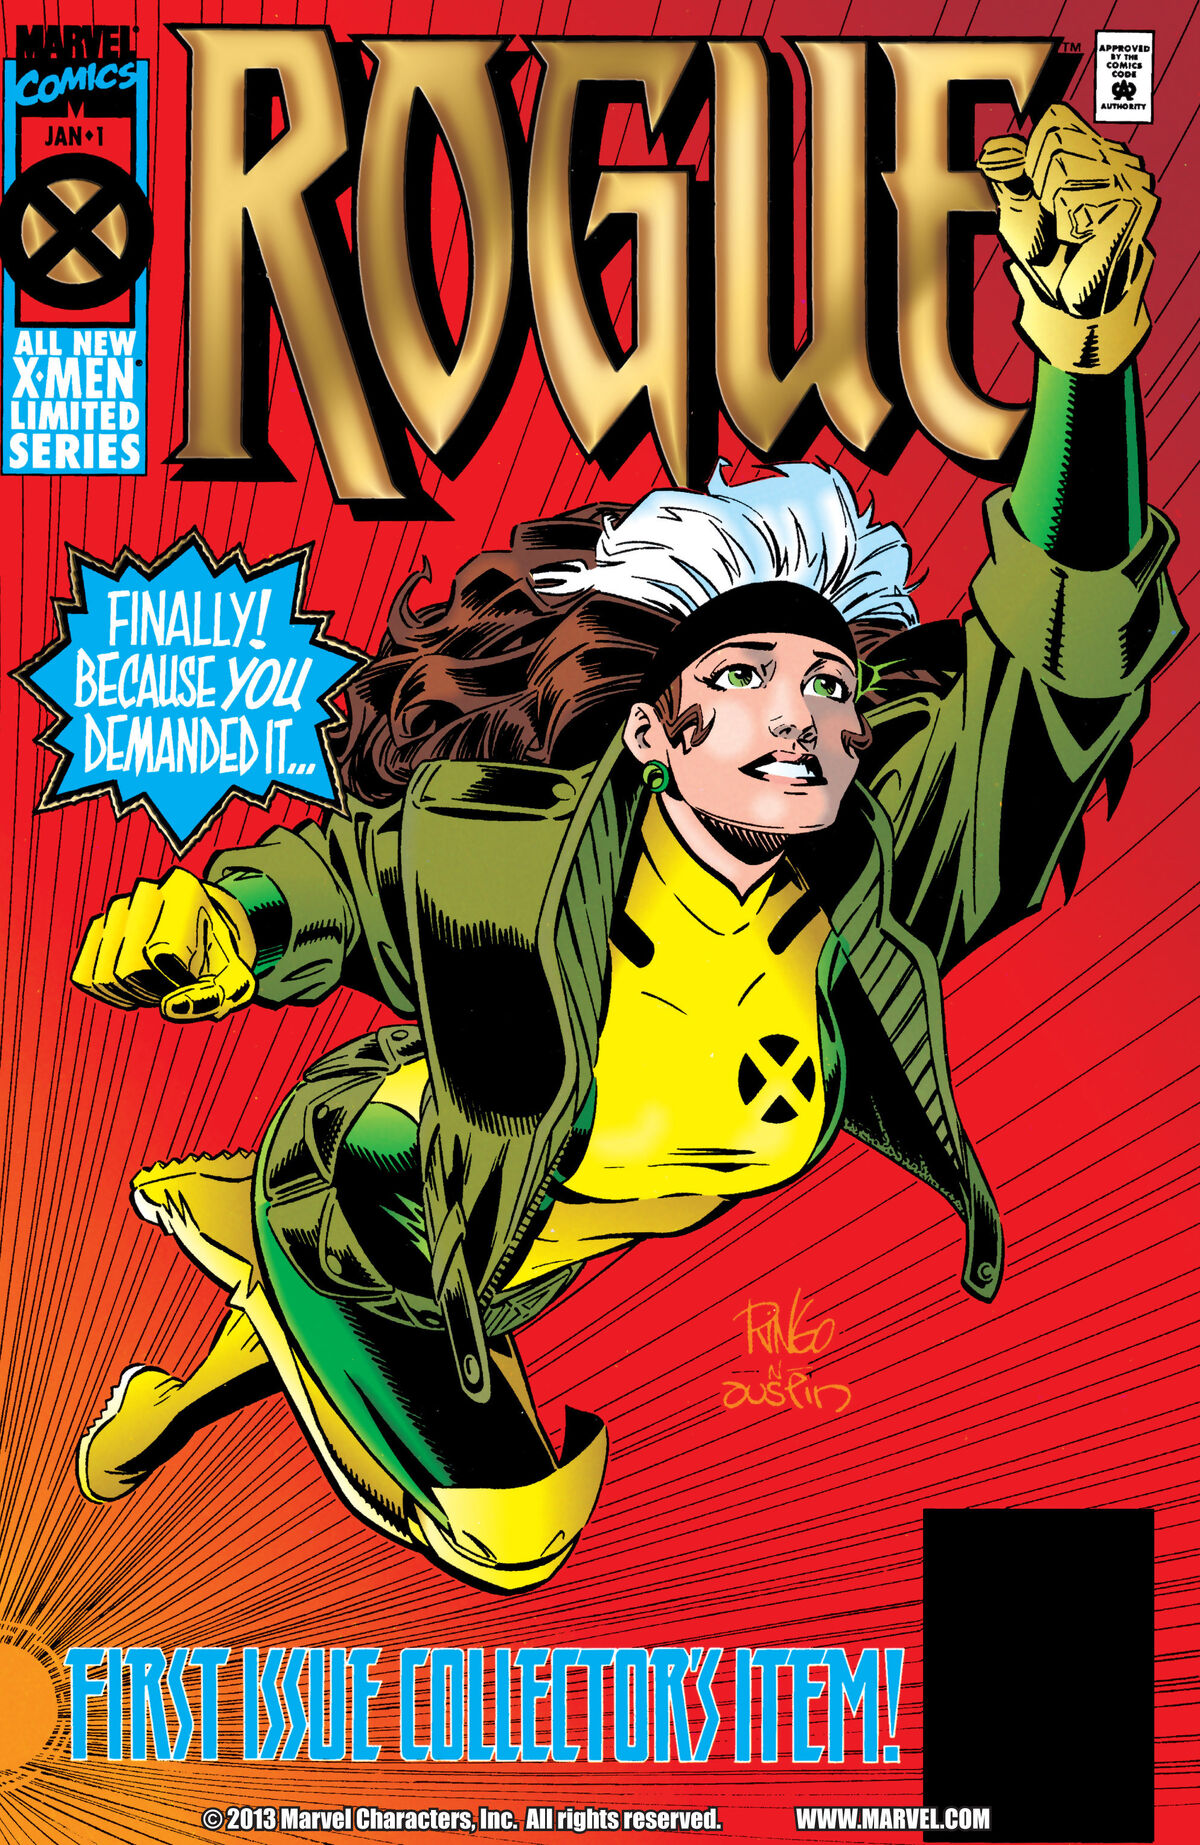 Rogue (Marvel Comics) - Wikipedia, gambit death touch 